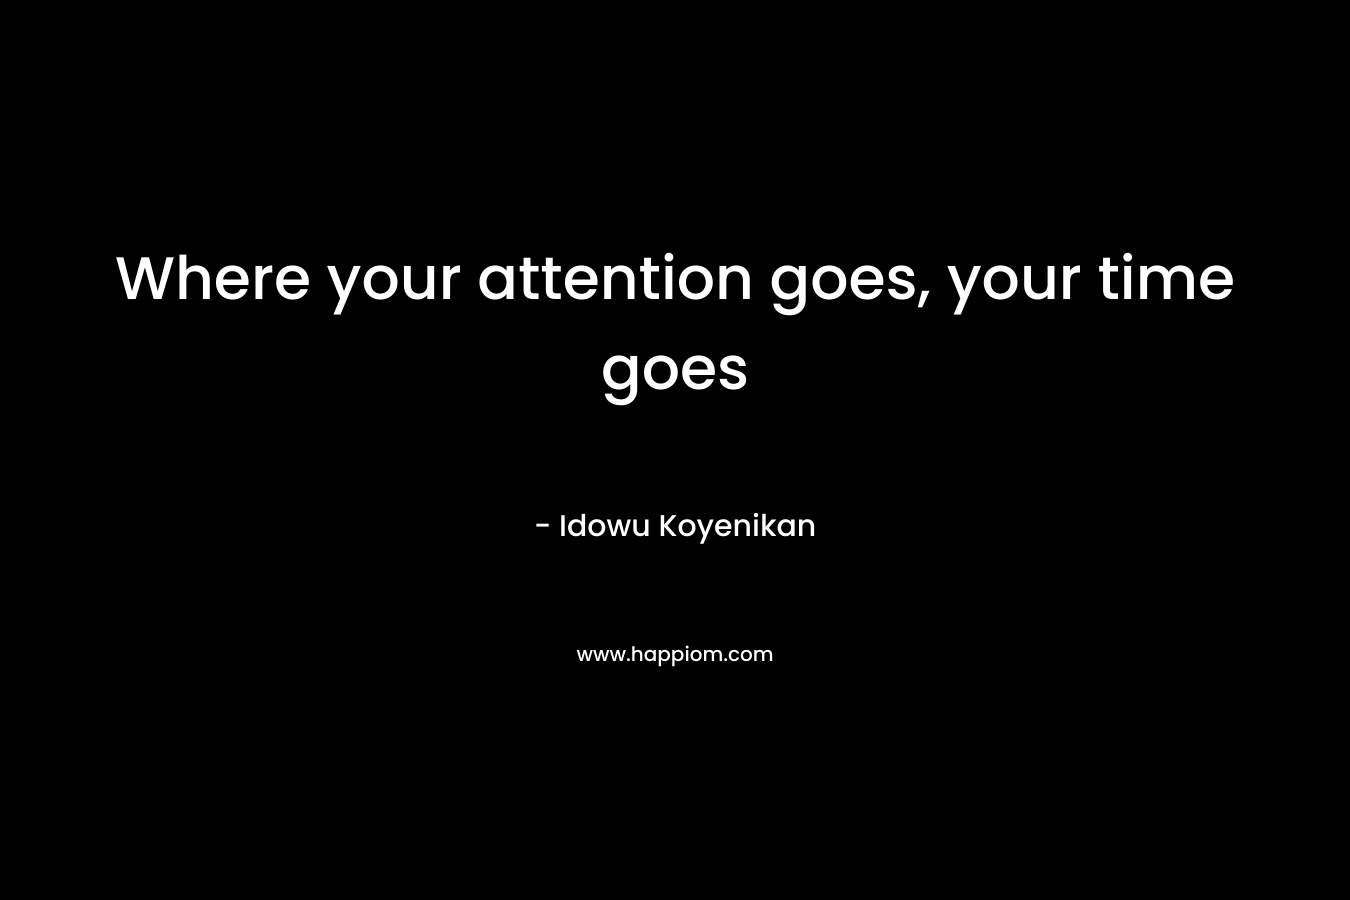 Where your attention goes, your time goes